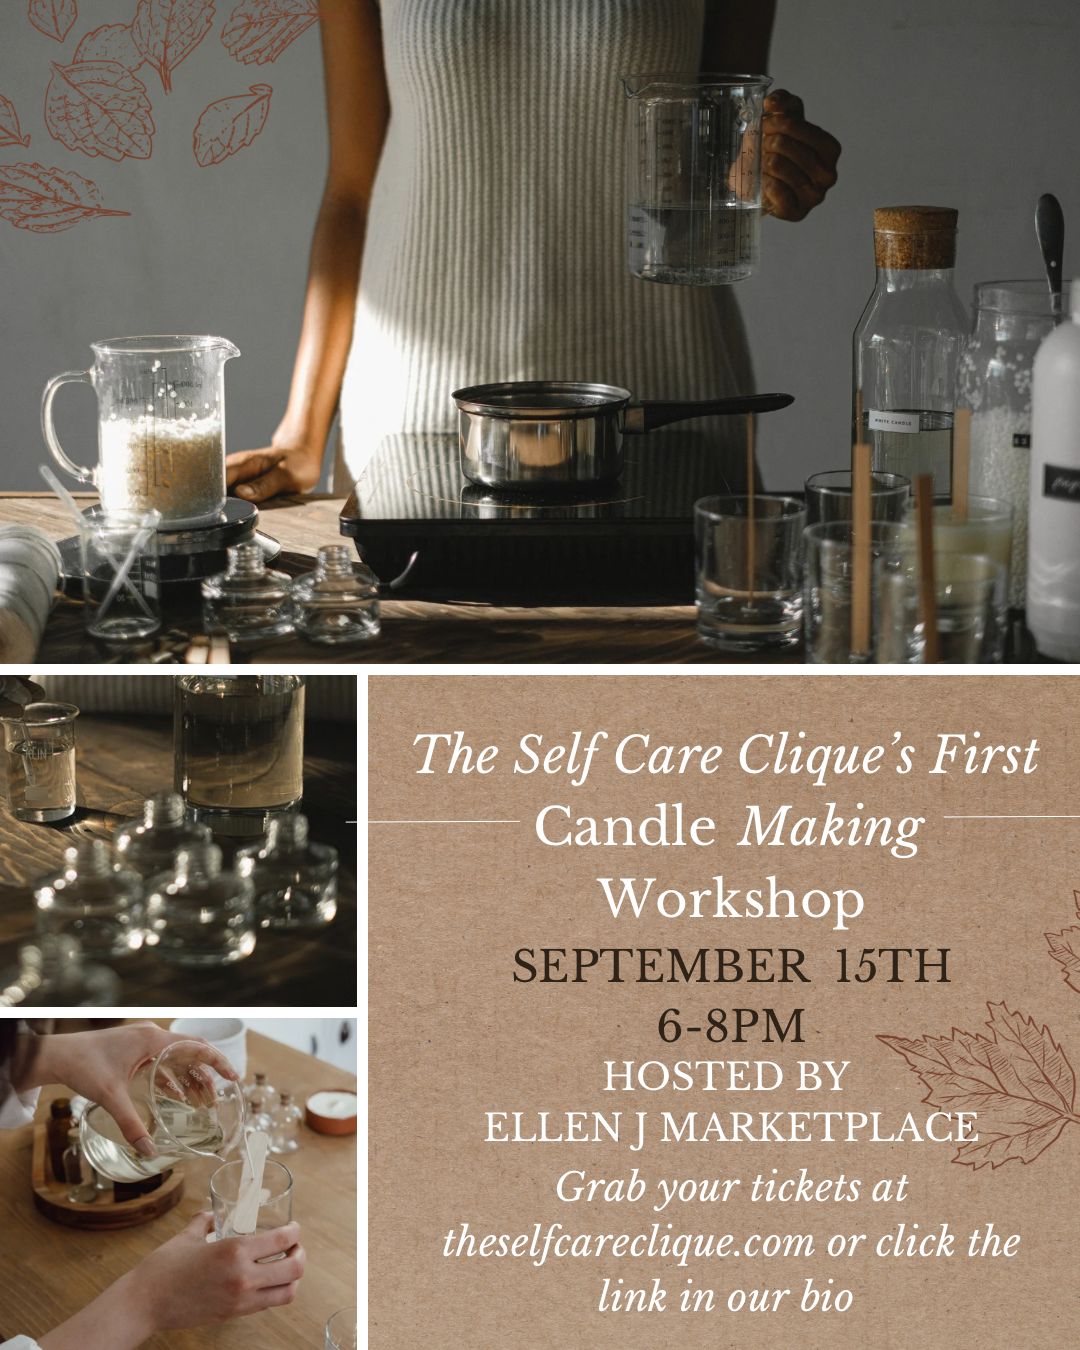 Fall Candle Kit – Scent Workshop